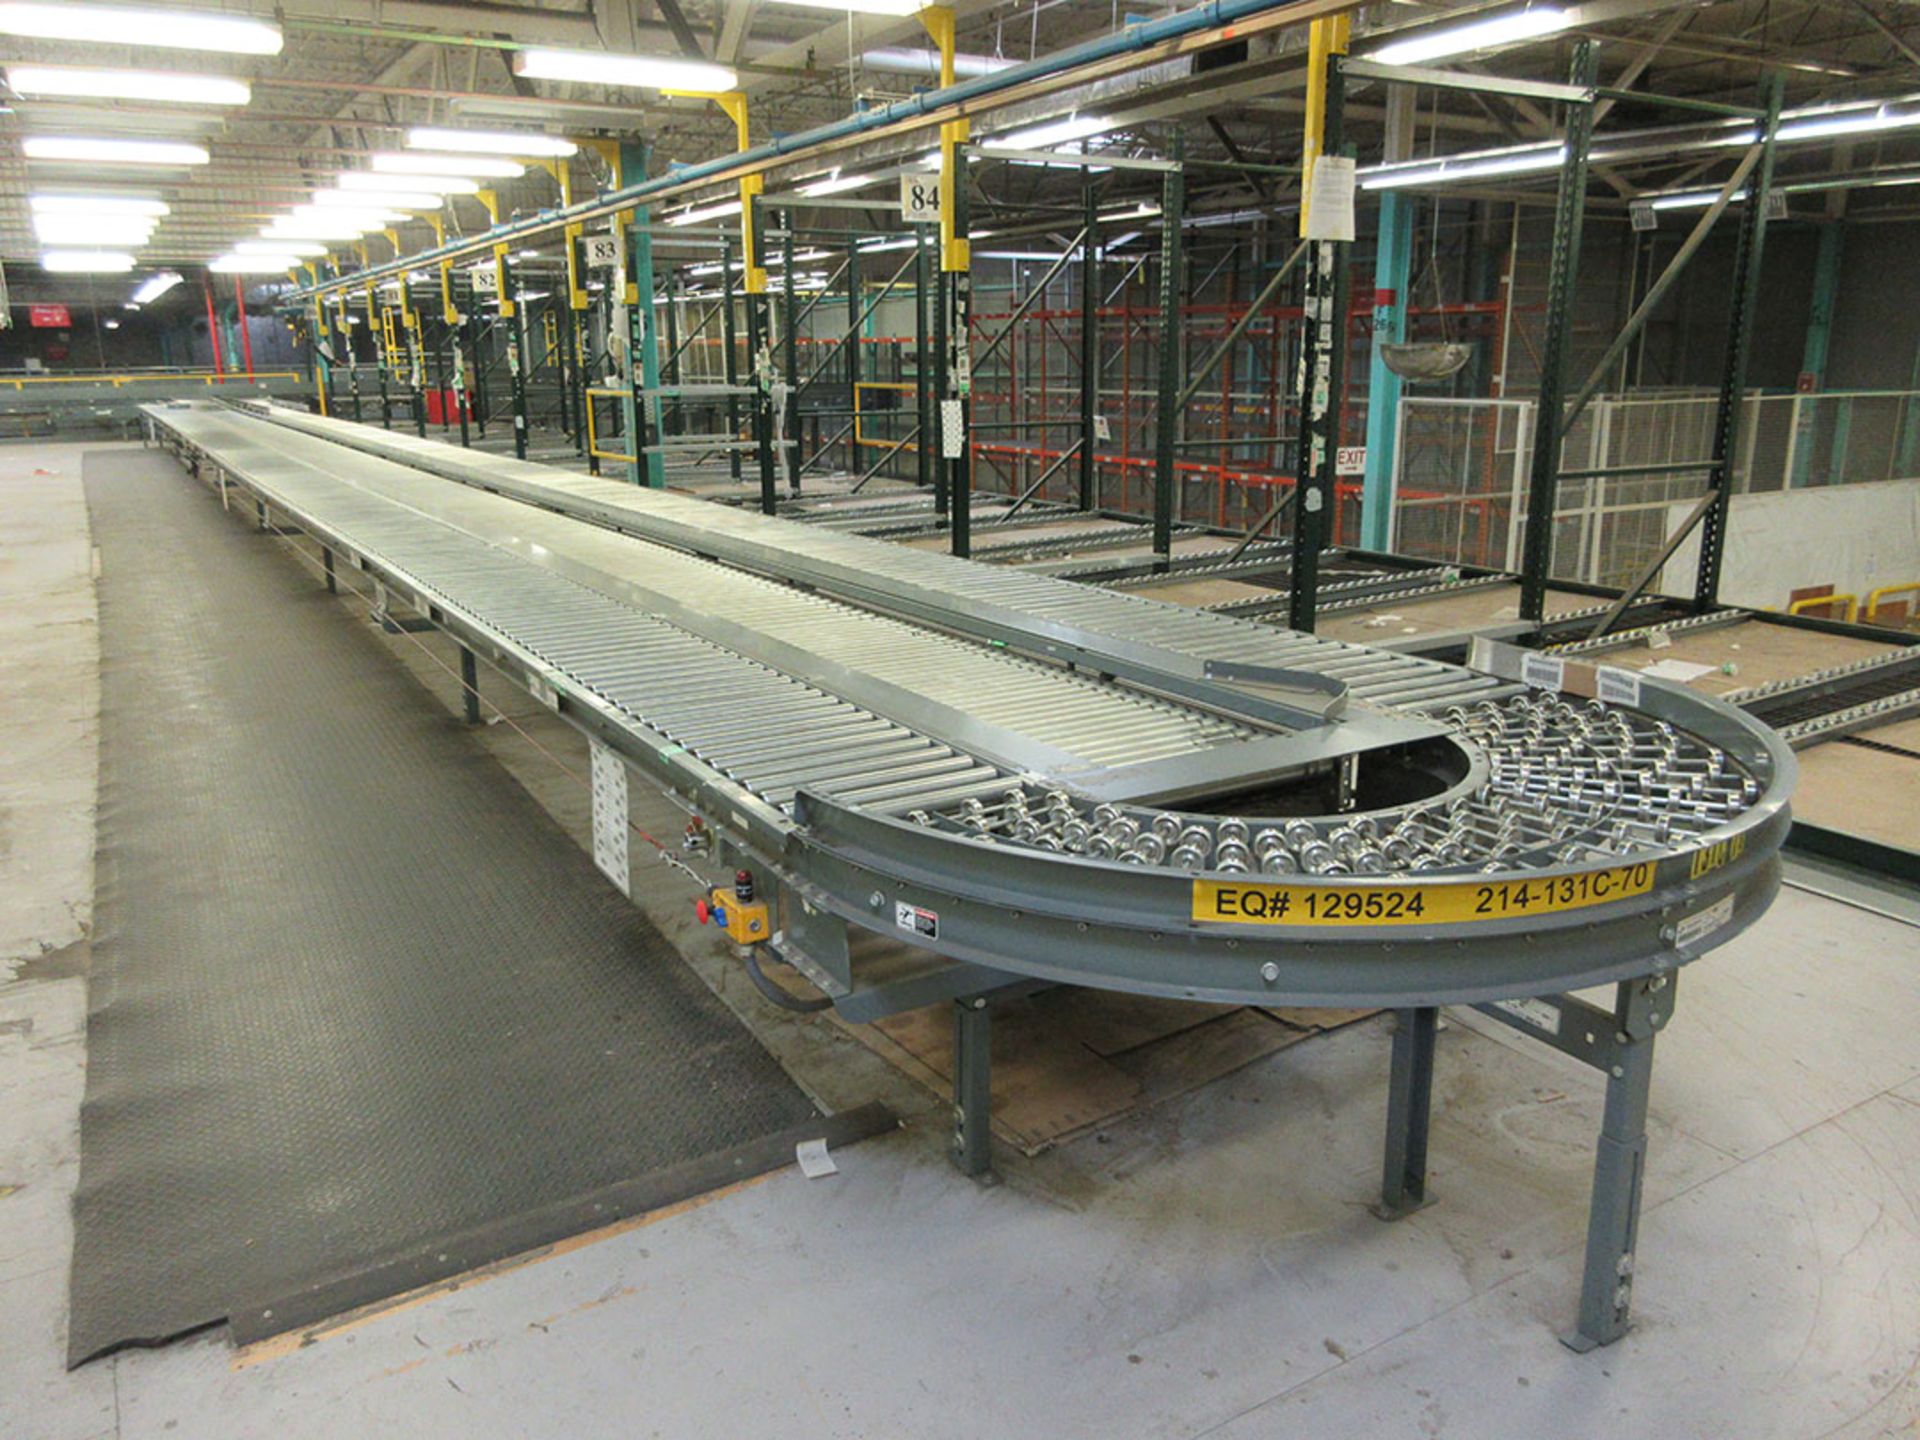 SOUTHERN SYSTEMS INDUSTRIAL CONVEYOR; LOCATED EAST SIDE MEZZANINE, APPROX., INCLUDES (3) INCLINES - Image 3 of 3